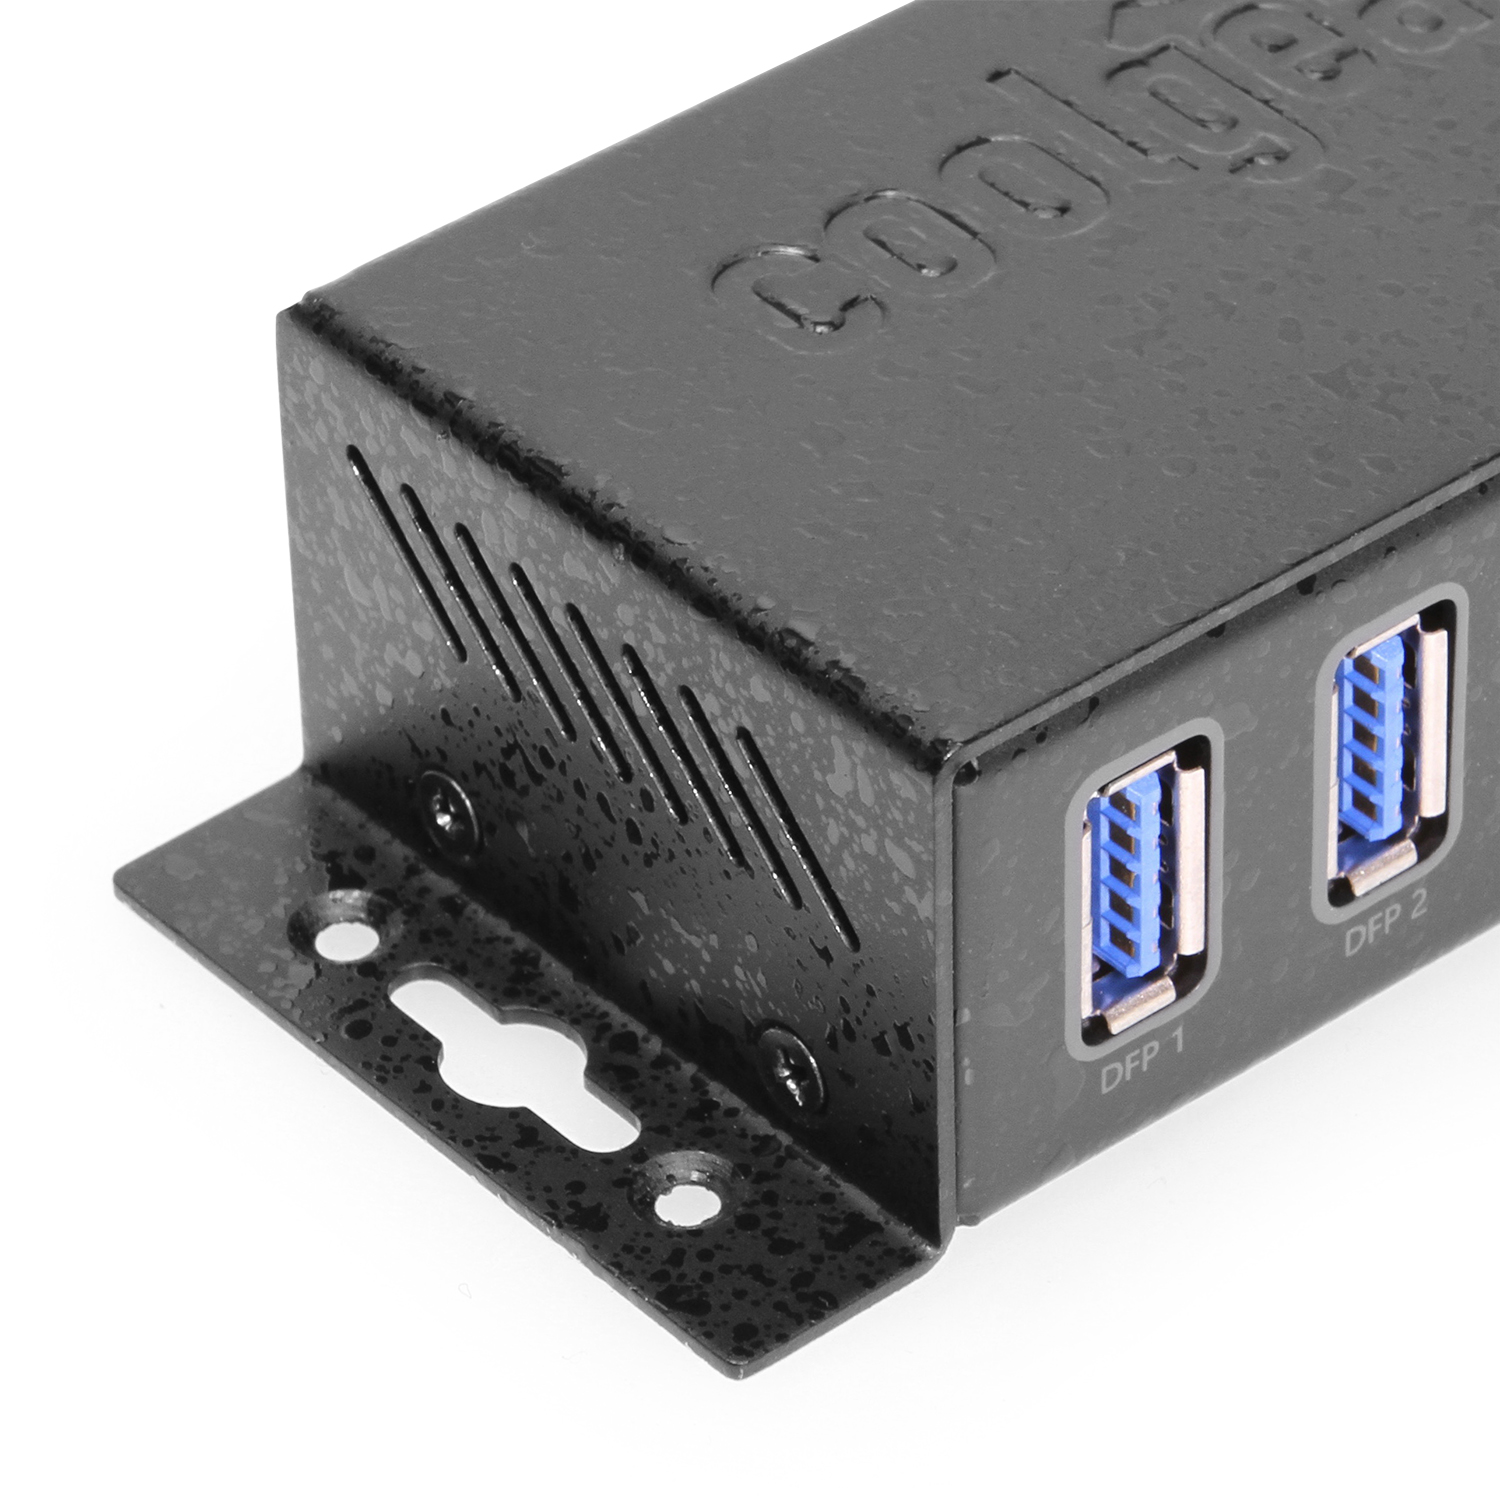 4-Port USB 3.2 Gen 2 3 Type-C 1 Type-A Industrial Surface & DIN-Rail Mount  Hub w/ ESD Surge Protection